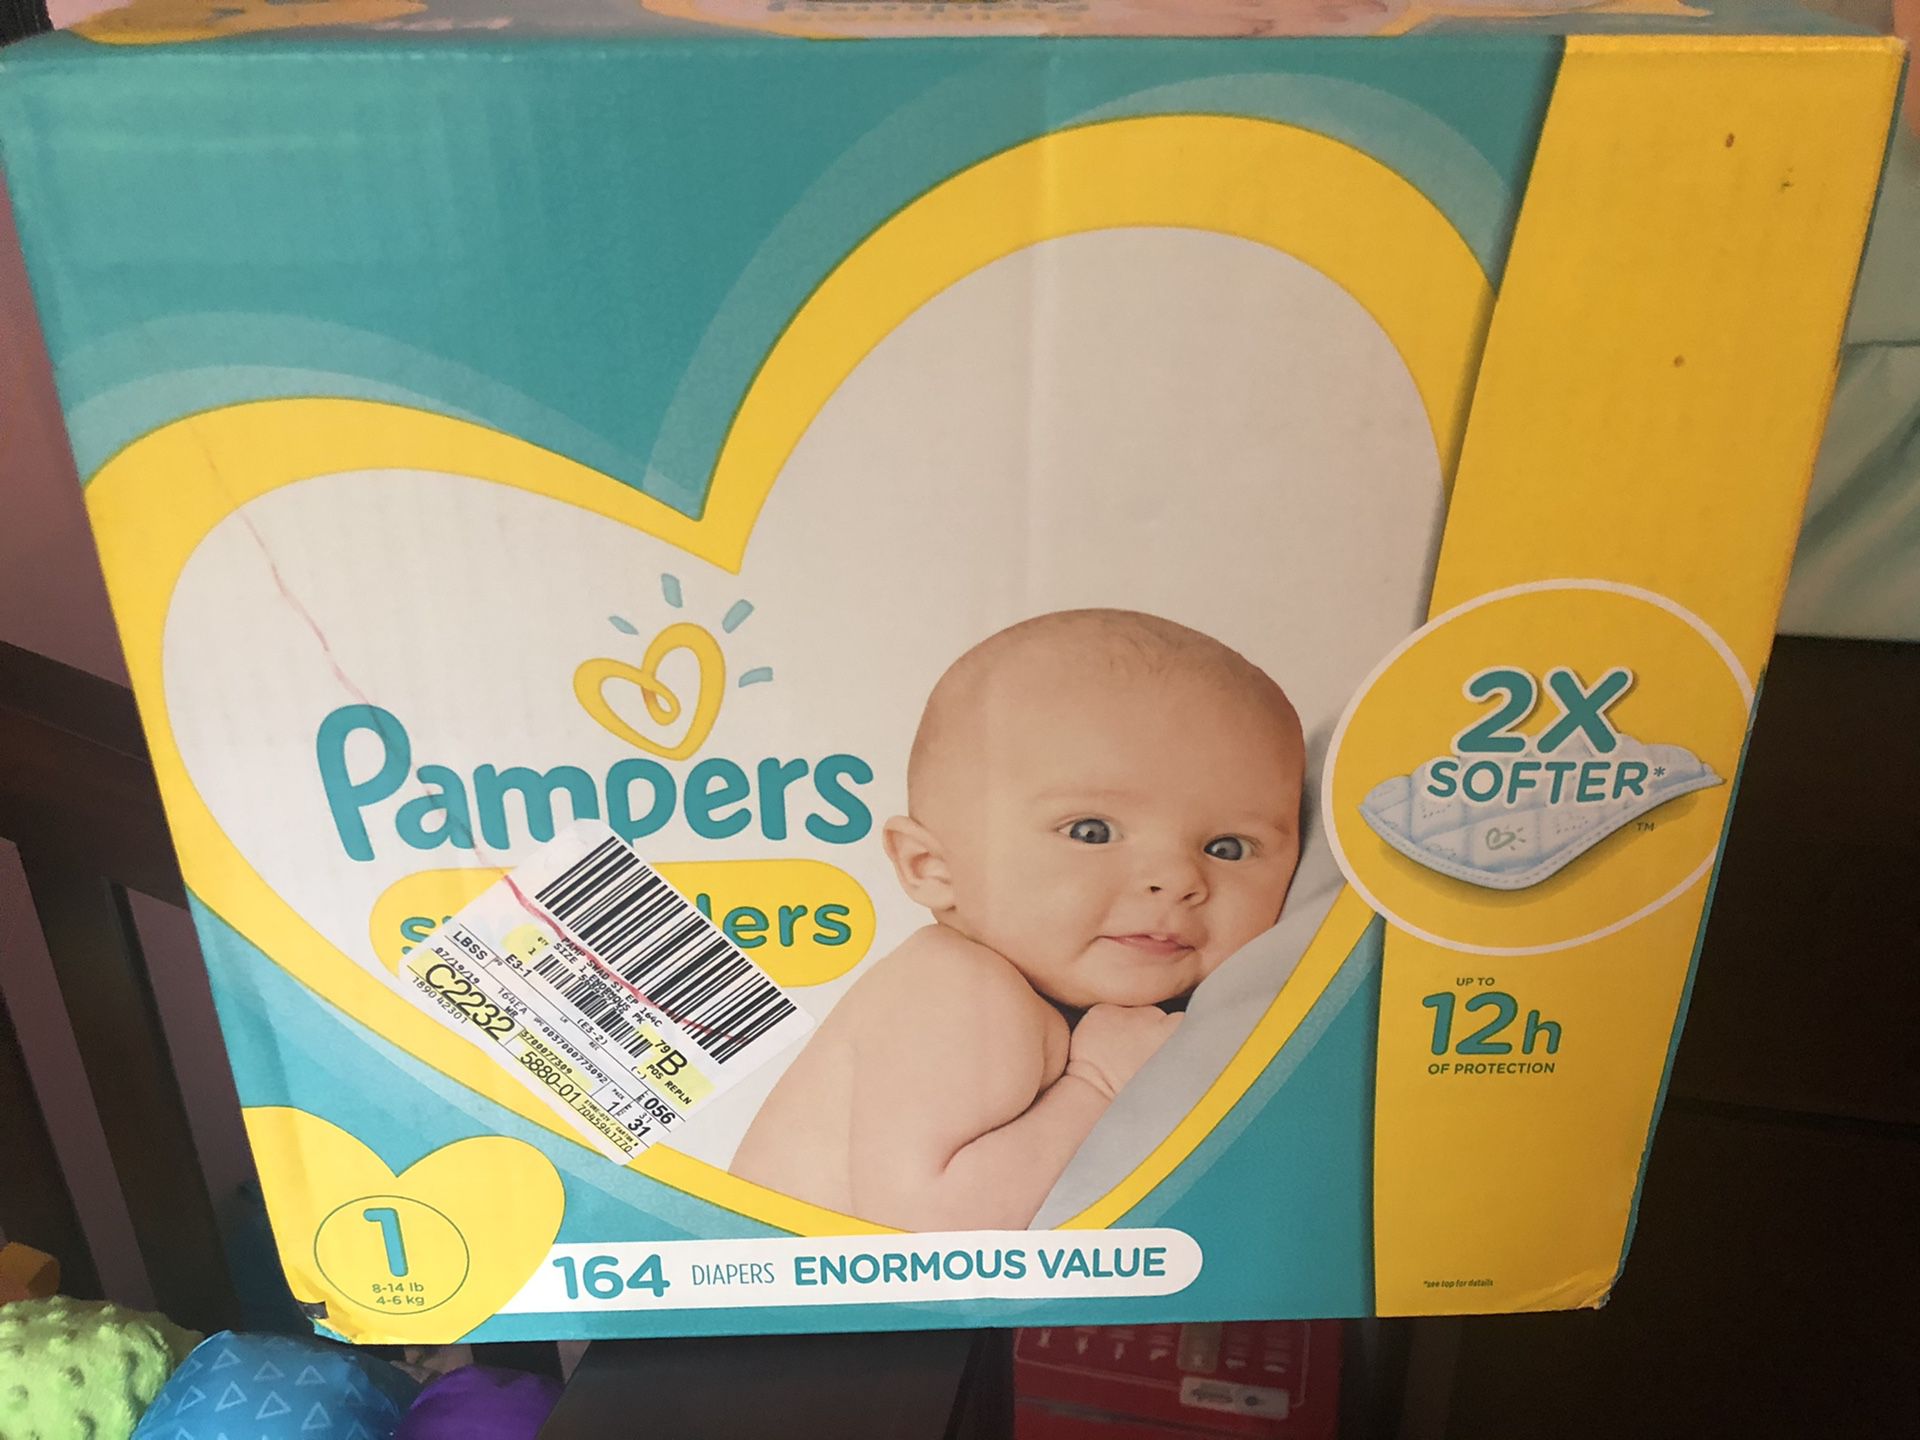 Pampers size 1 diapers 164 count